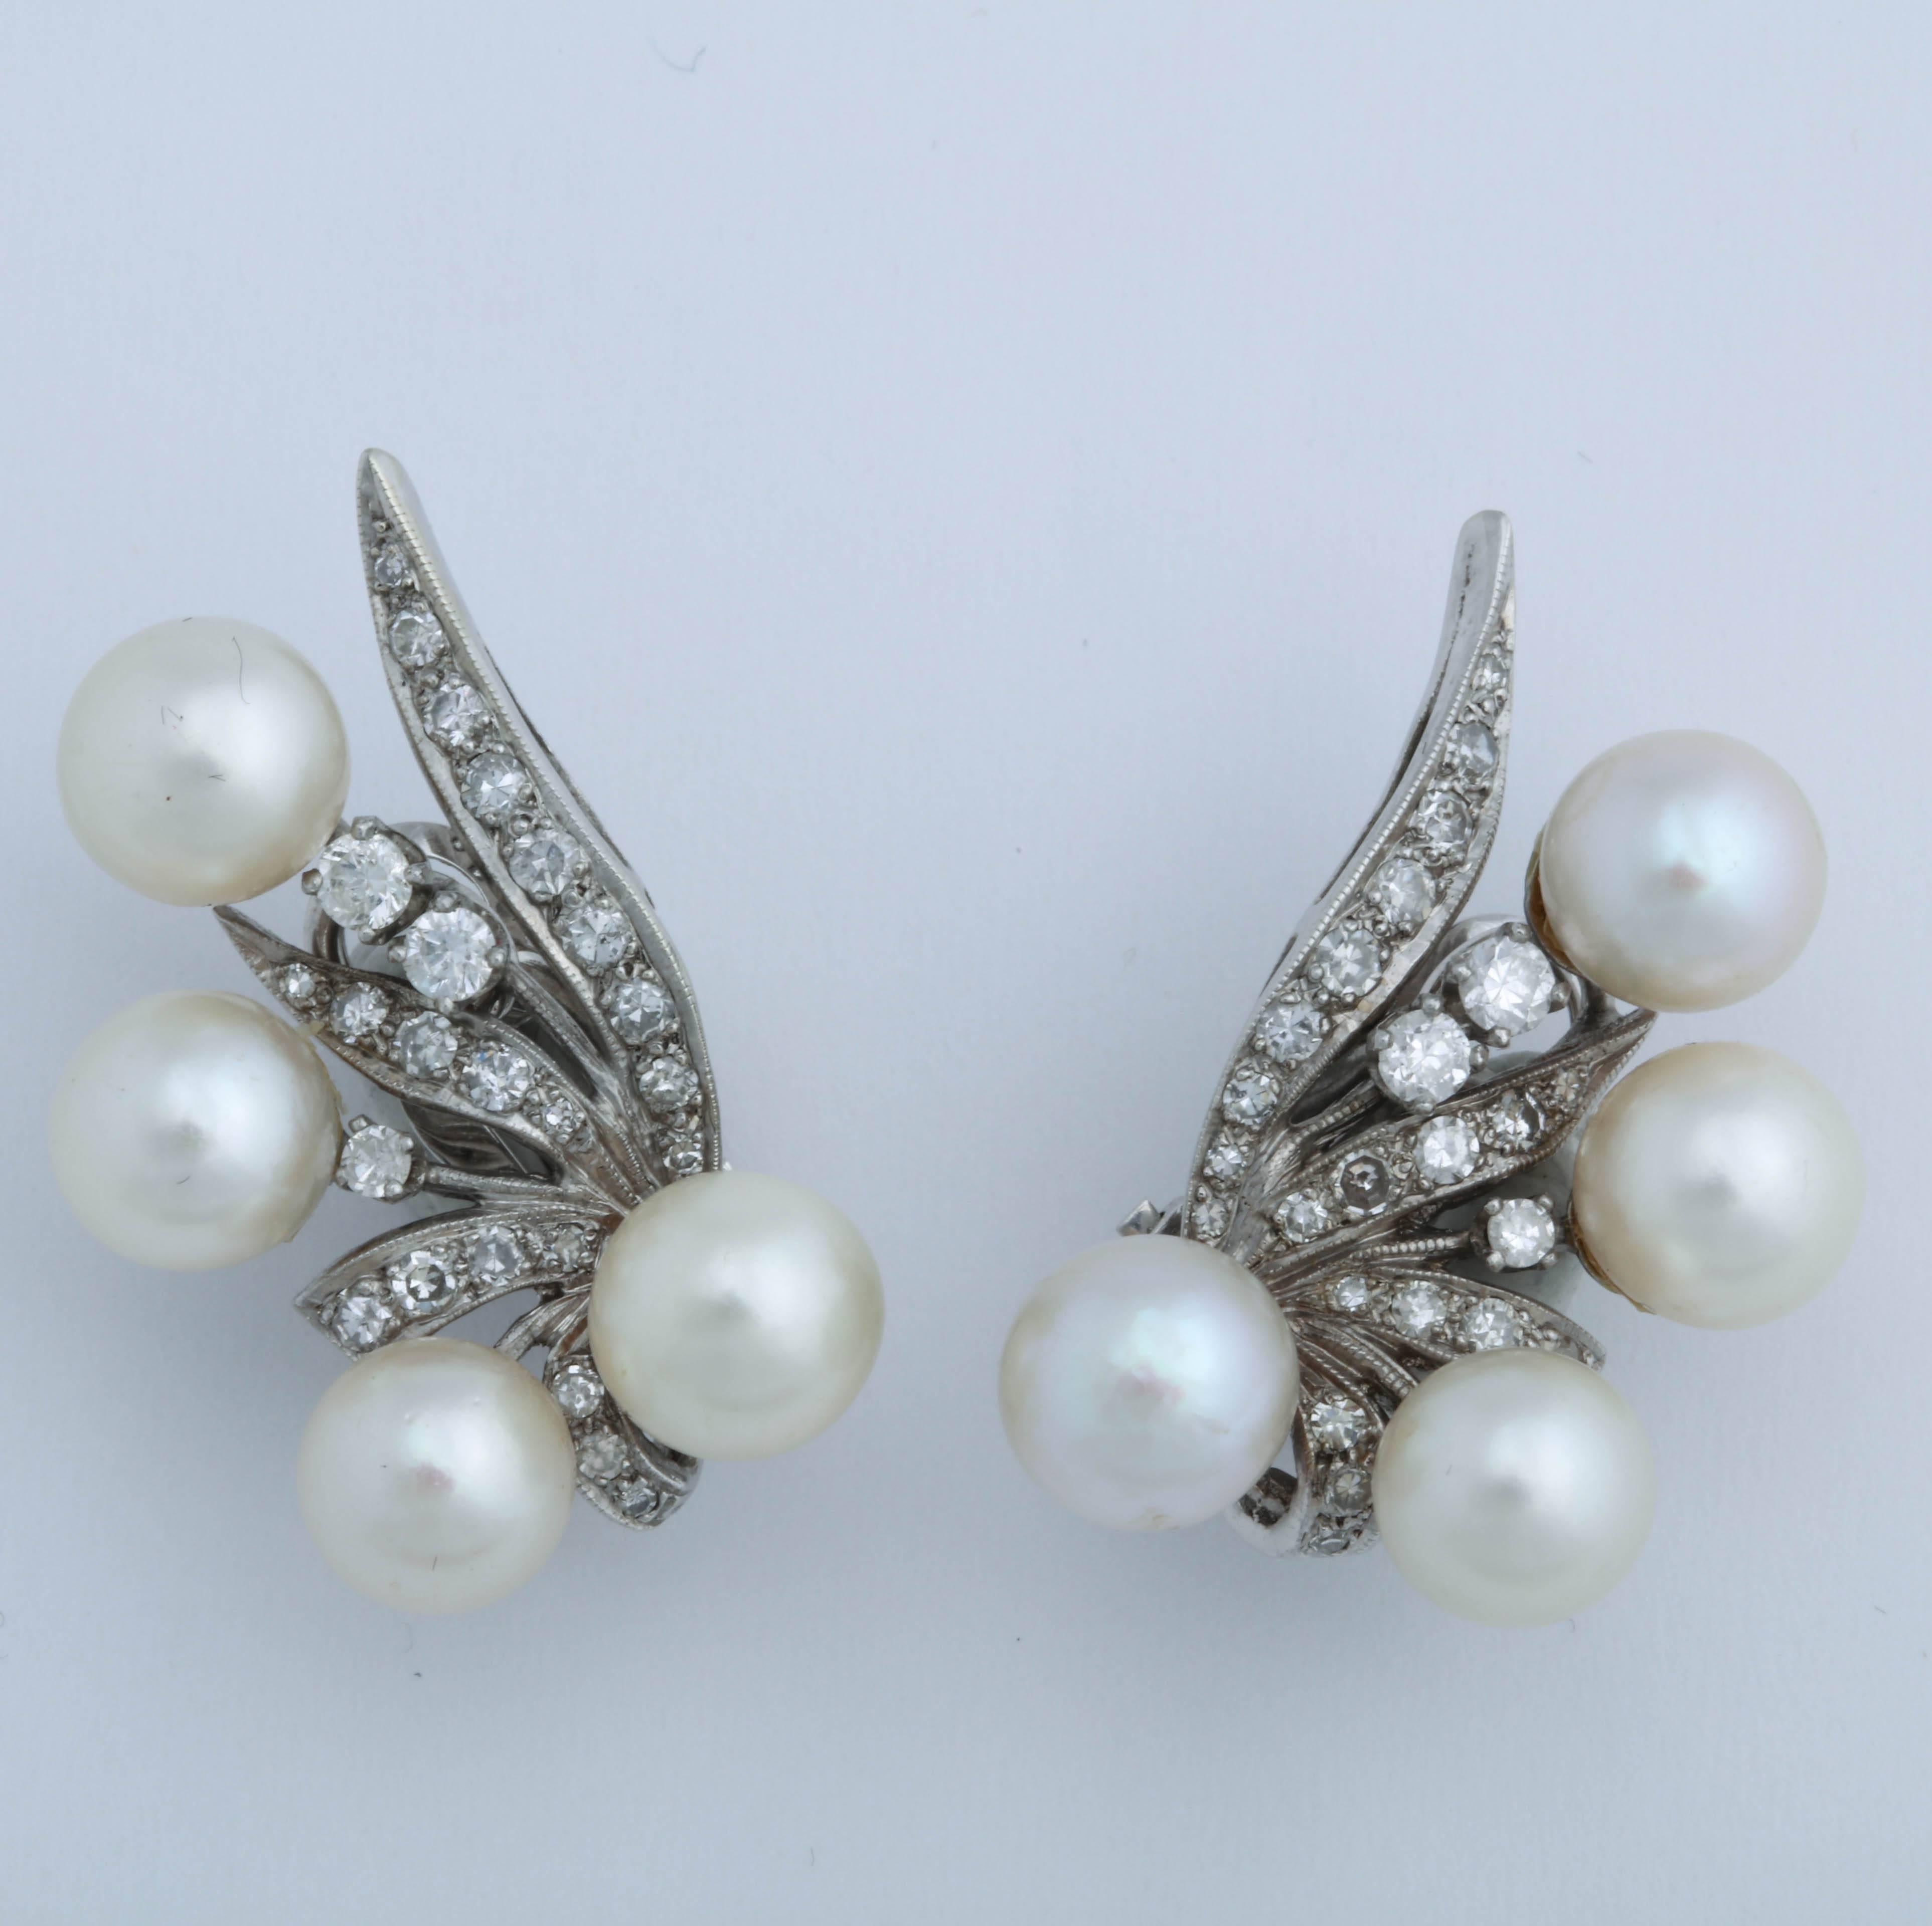 Beautiful cultured Pearls set with single & full cut clean & white Diamonds in a windswept Feather Design.  So 50's and dramatic